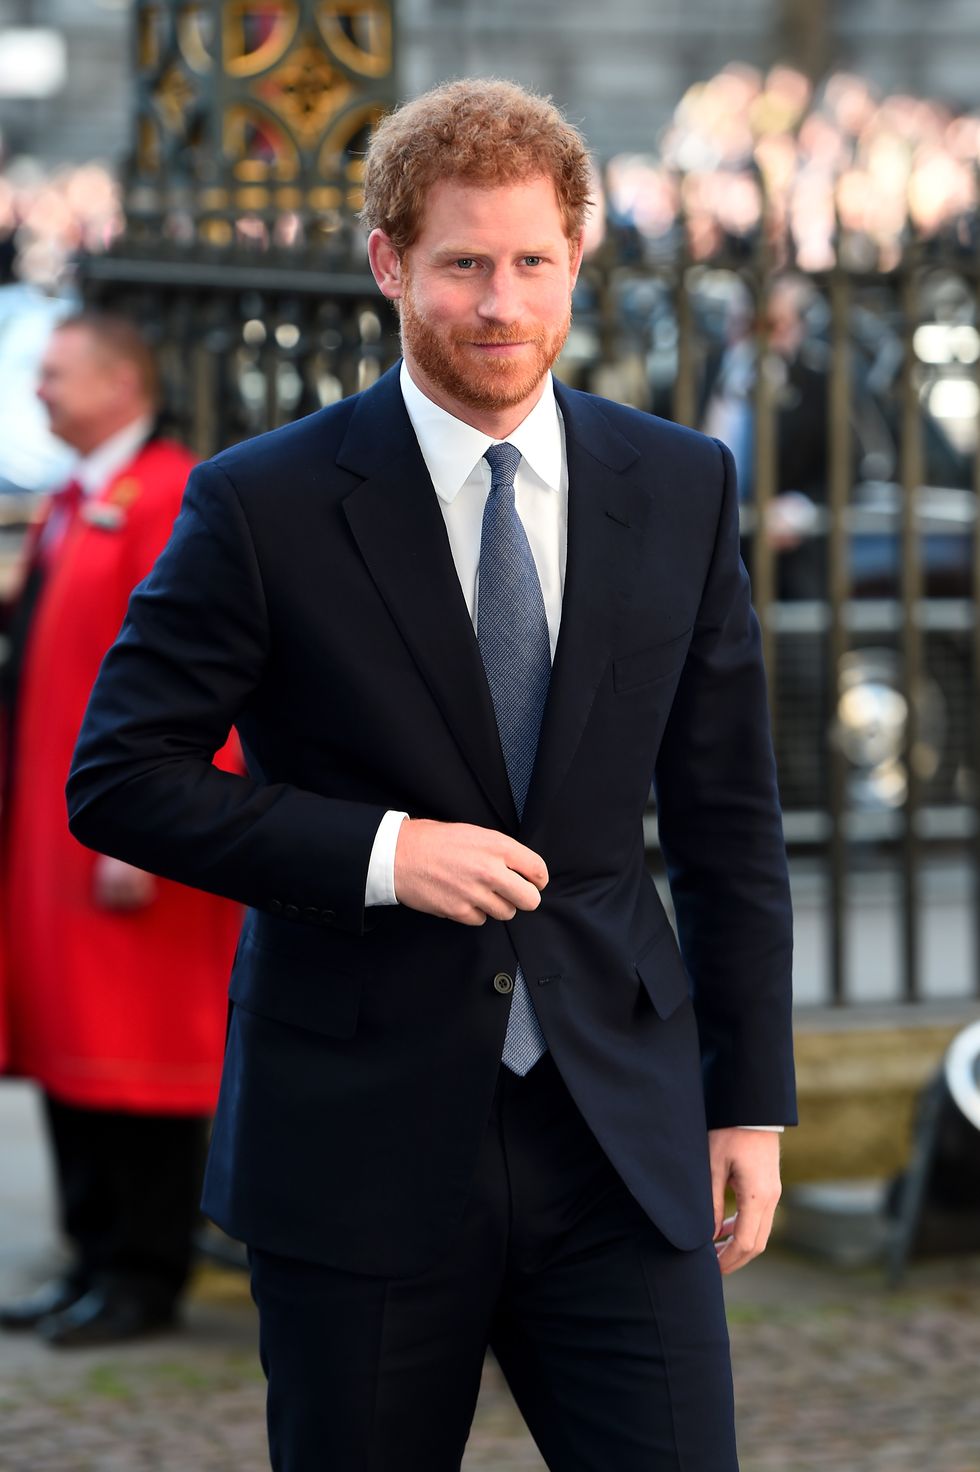 london, england   march 13  prince harry attends the annual commonwealth day service and reception during commonwealth day celebrations on march 13, 2017 in london, england  photo by eamonn m mccormackgetty images